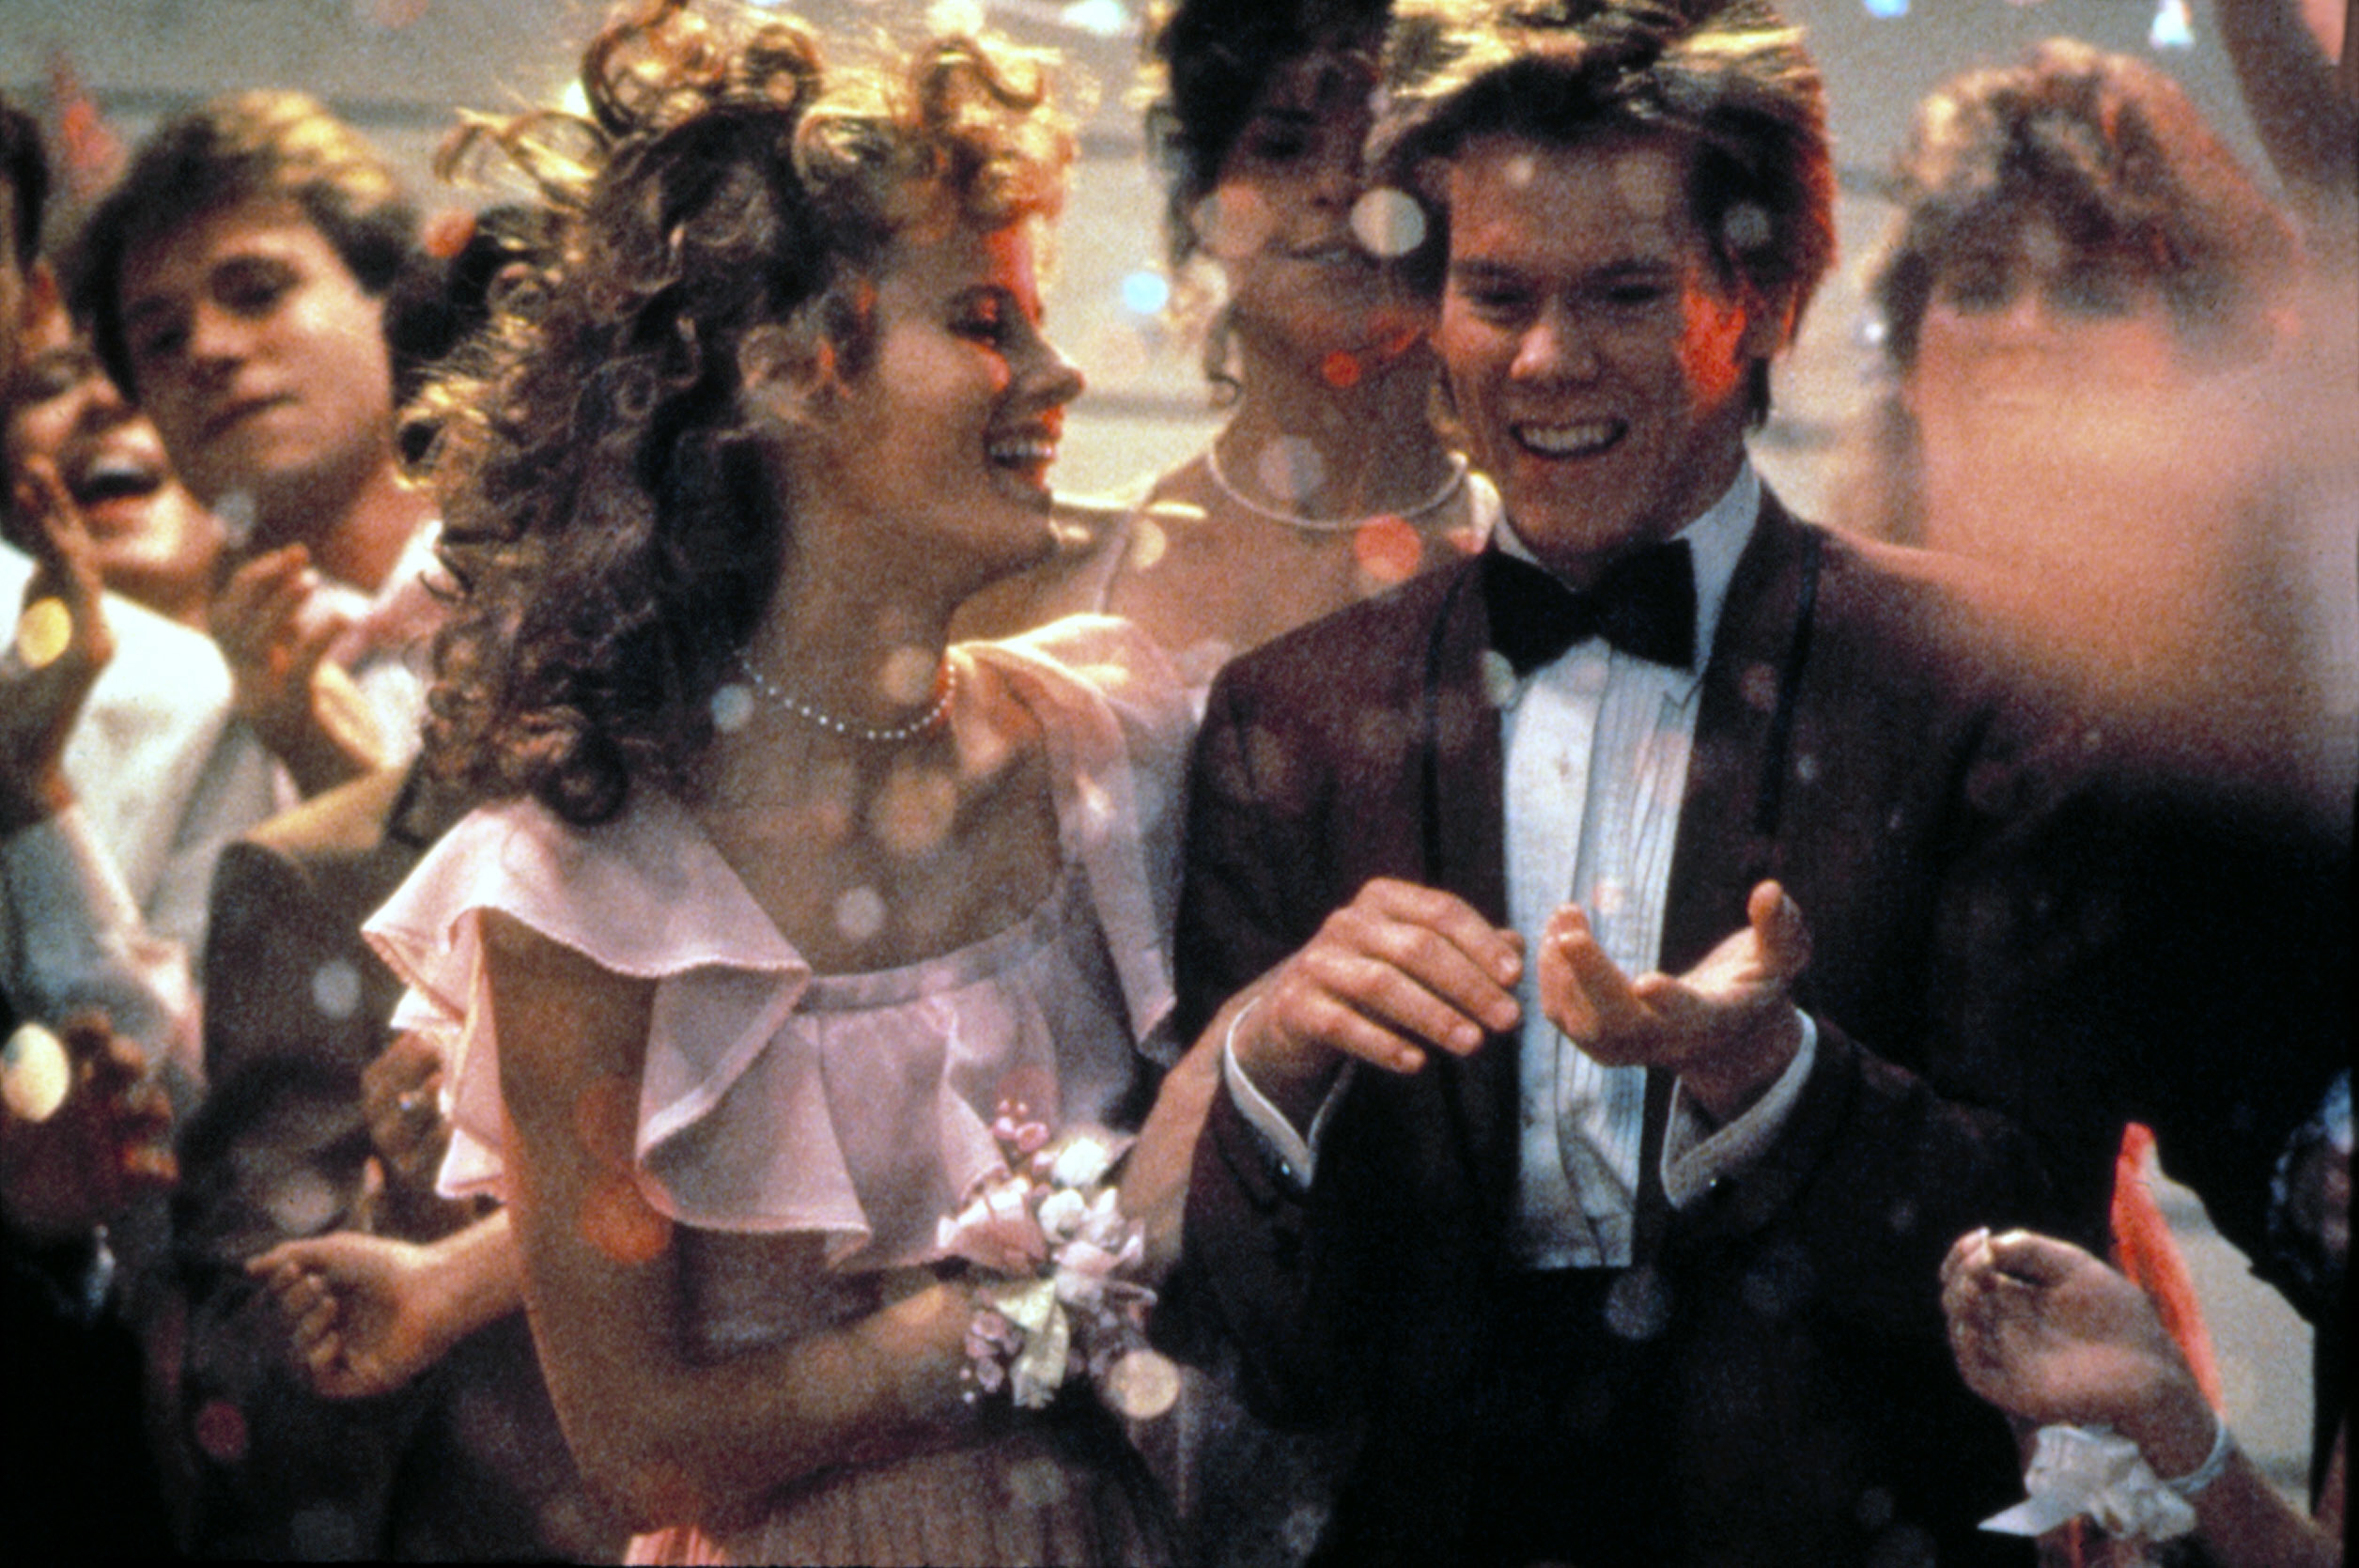 Kevin Bacon and Lori Singer in formal attire in a scene from &quot;Footloose&quot;